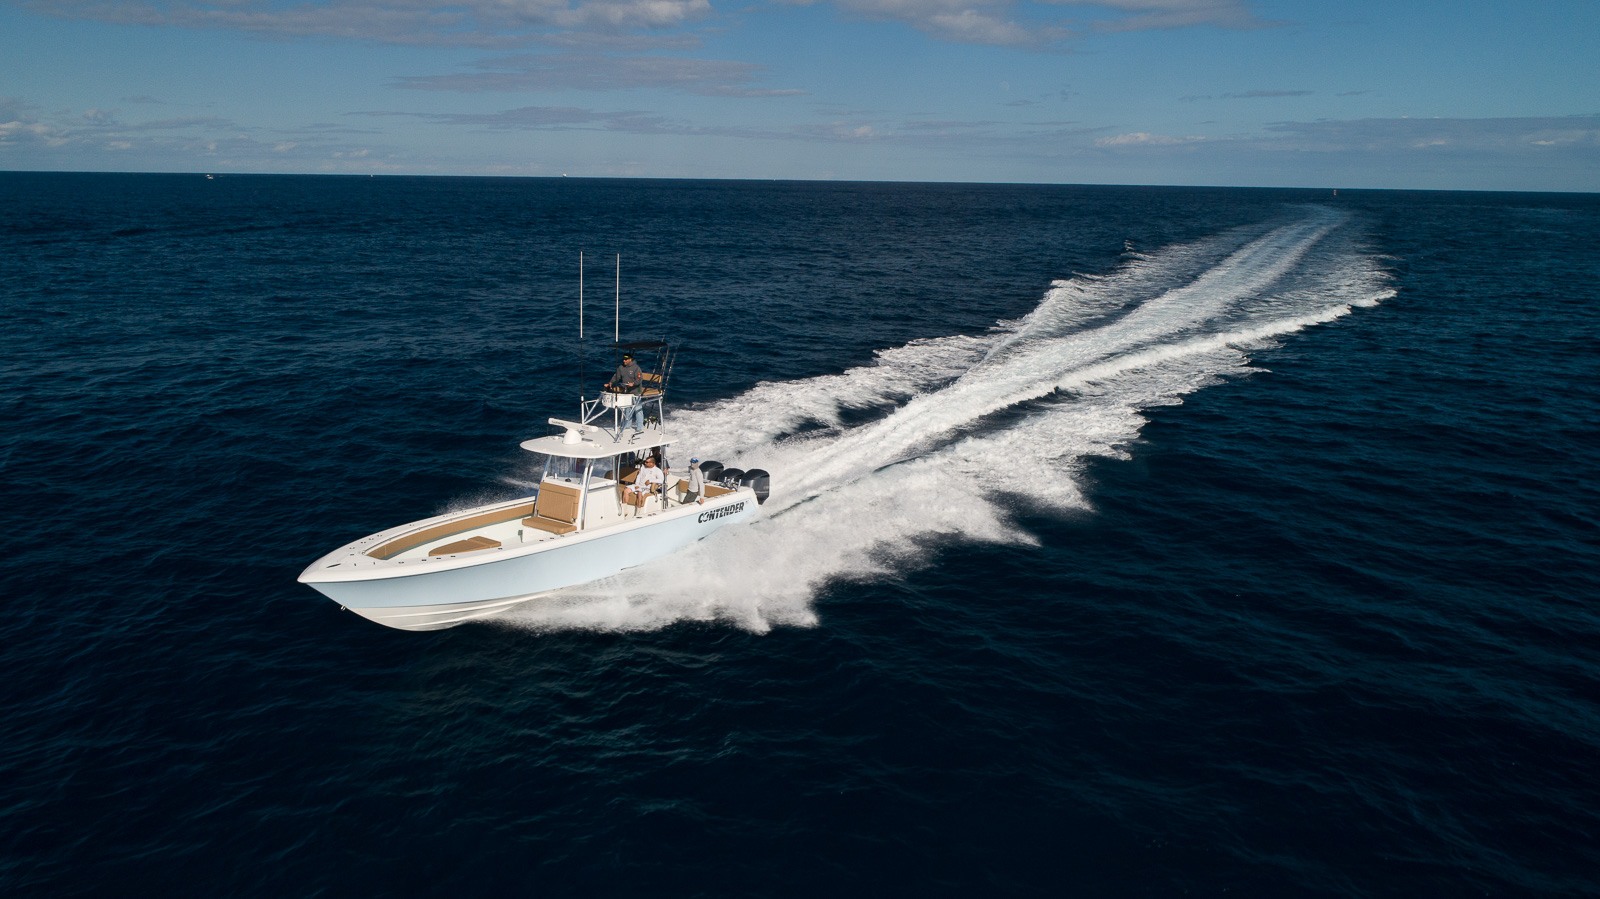 39 ST Tournament Fishing Boat - Contender Boats